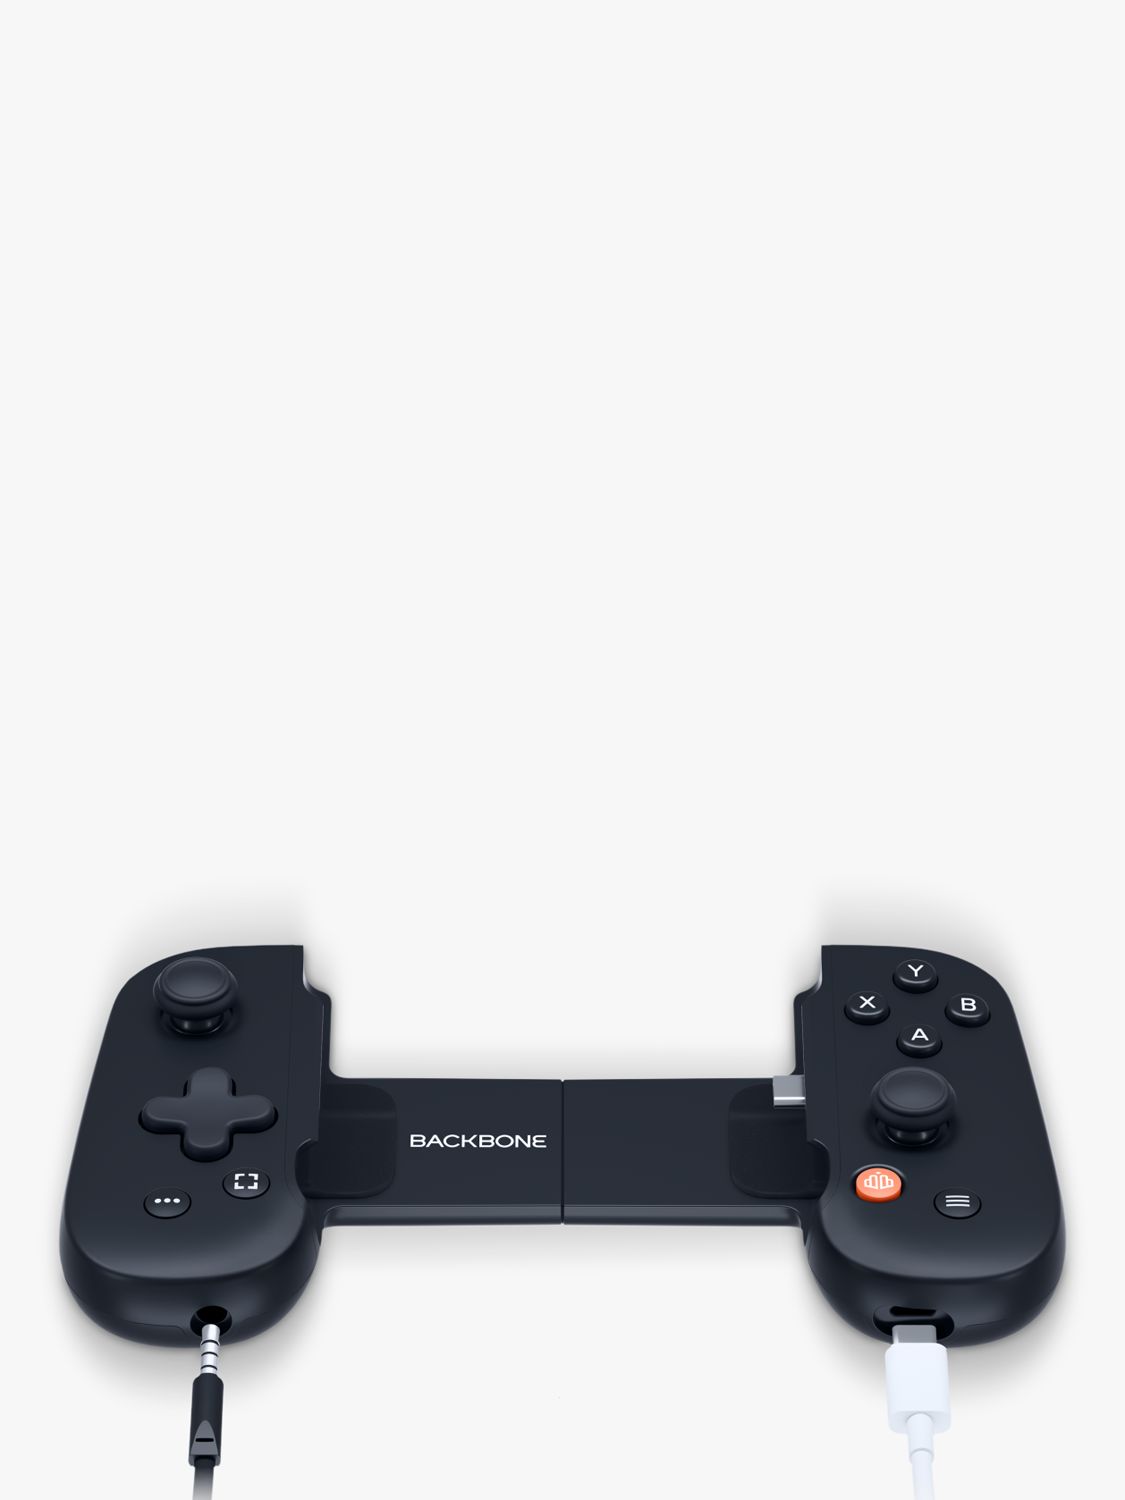 Backbone One Mobile Gaming Controller for Android, USB-C